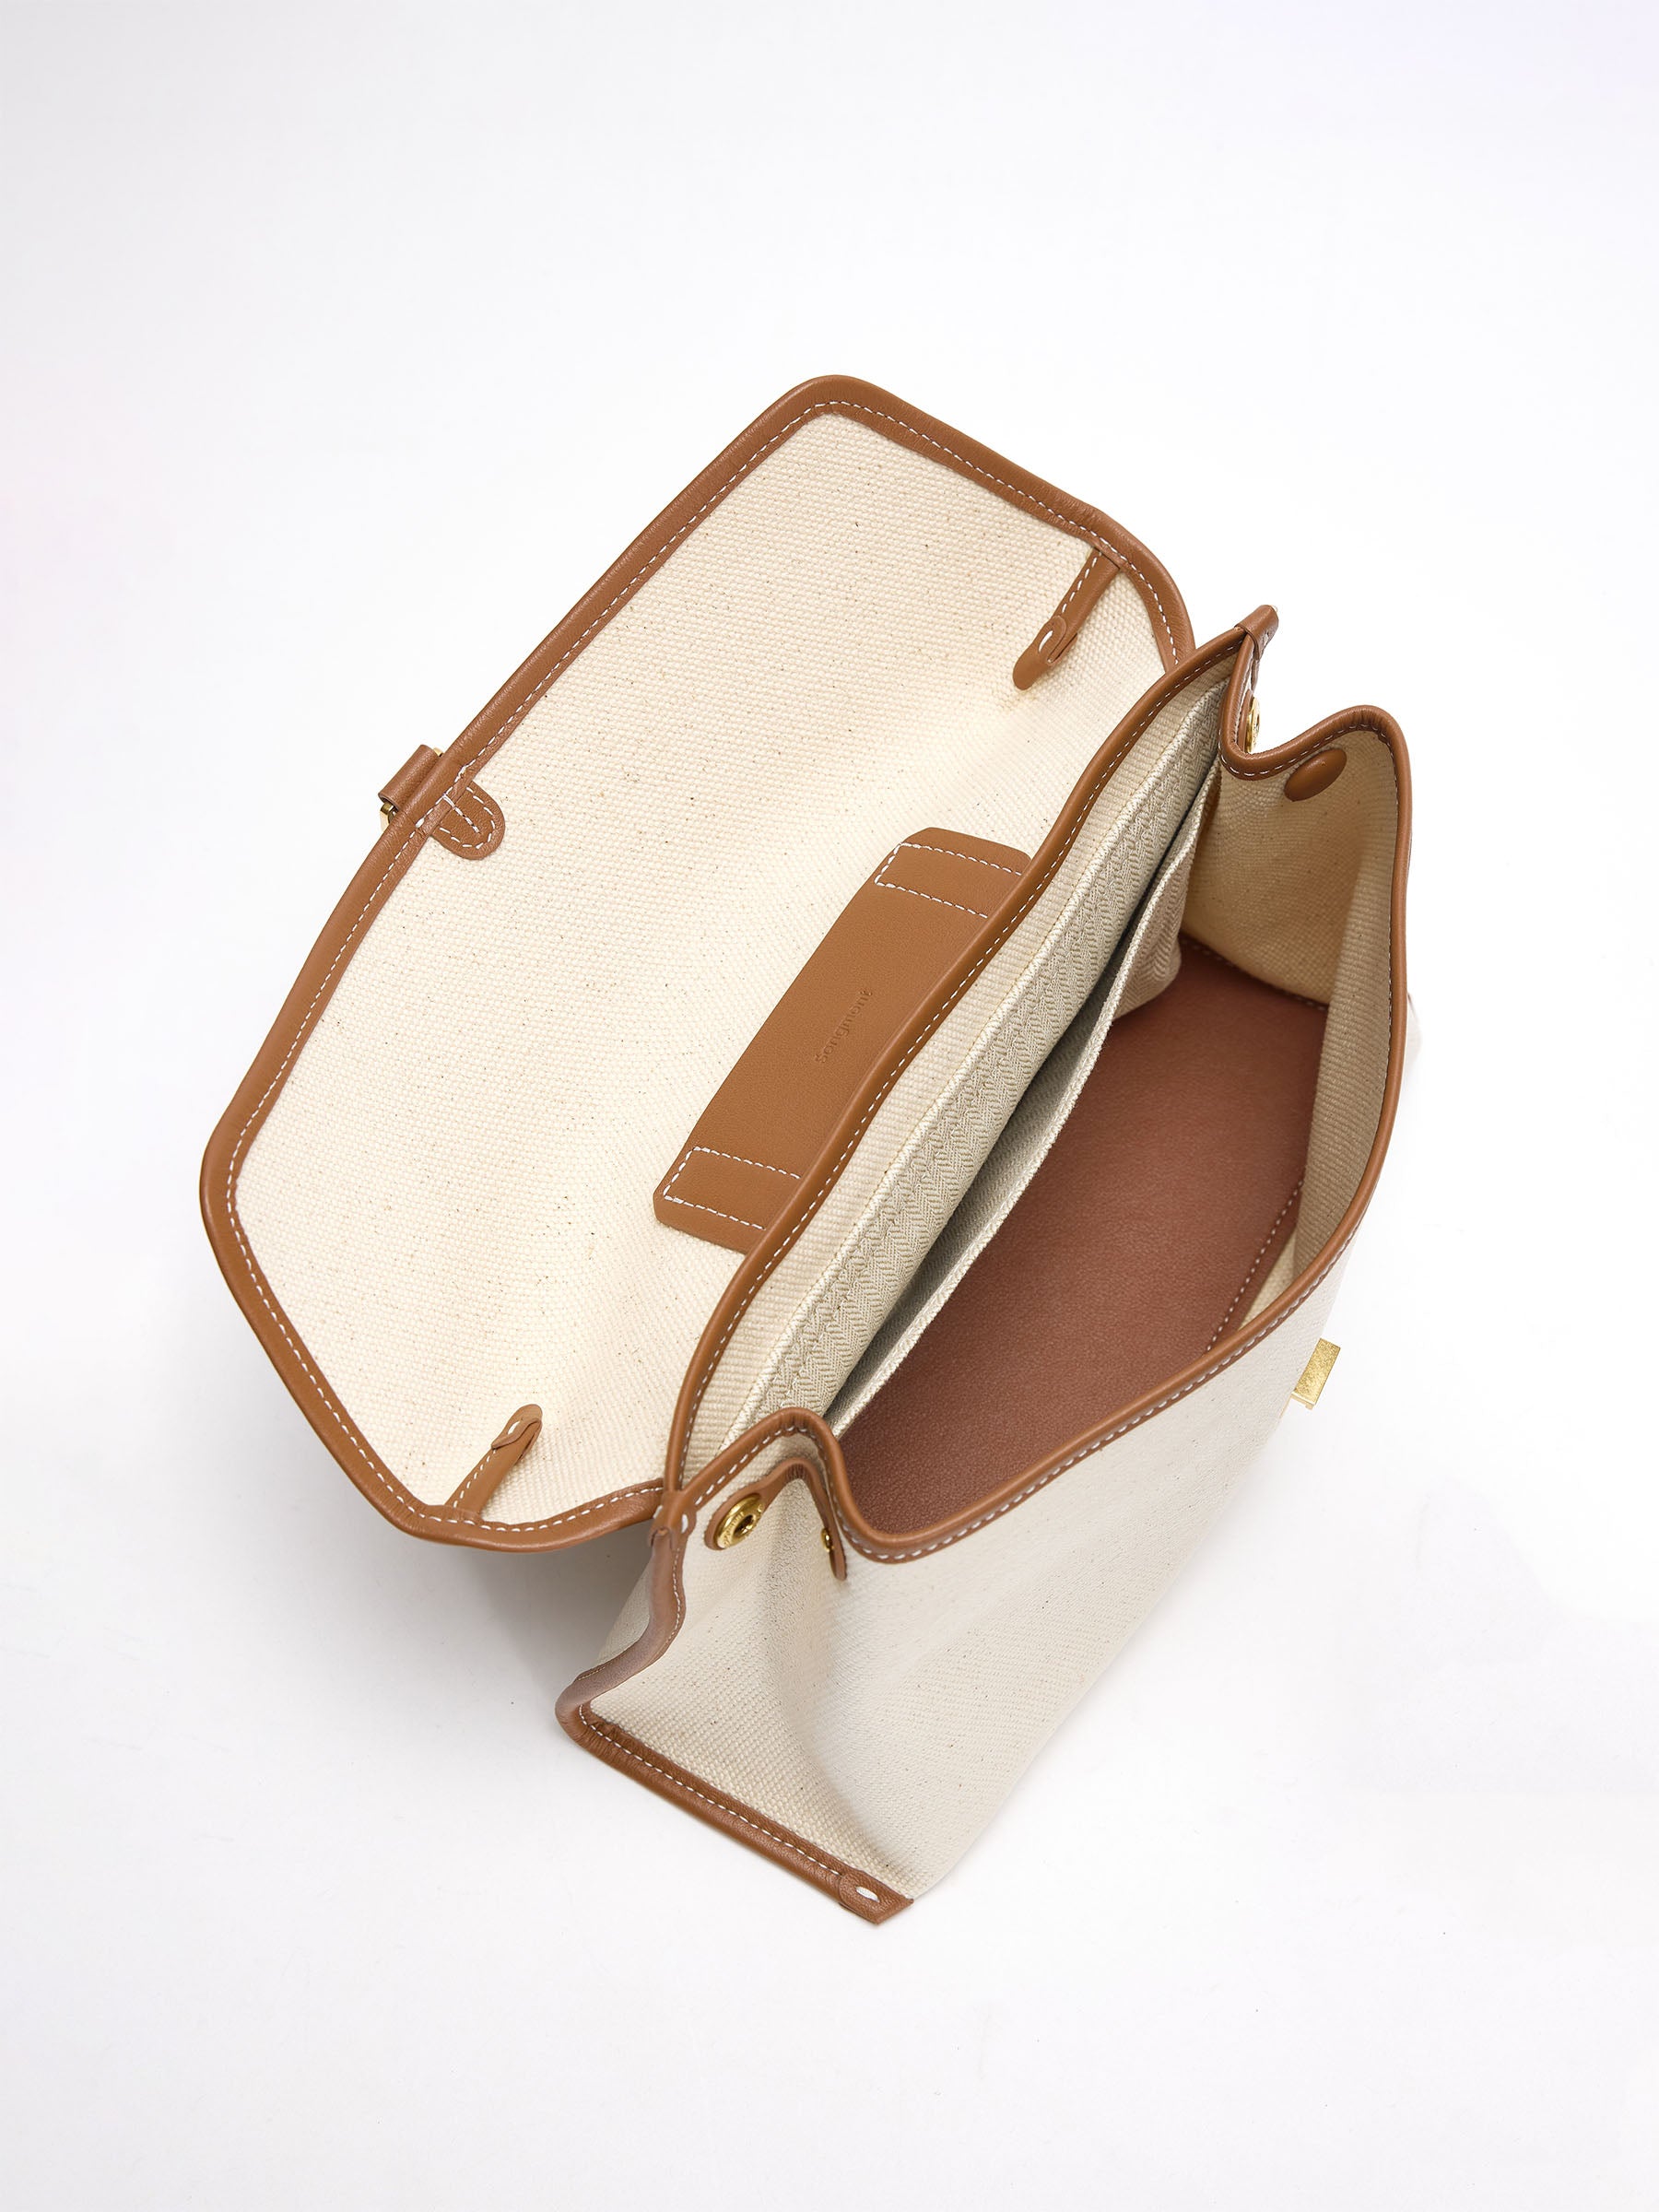 The Small Shan Satchel Bag